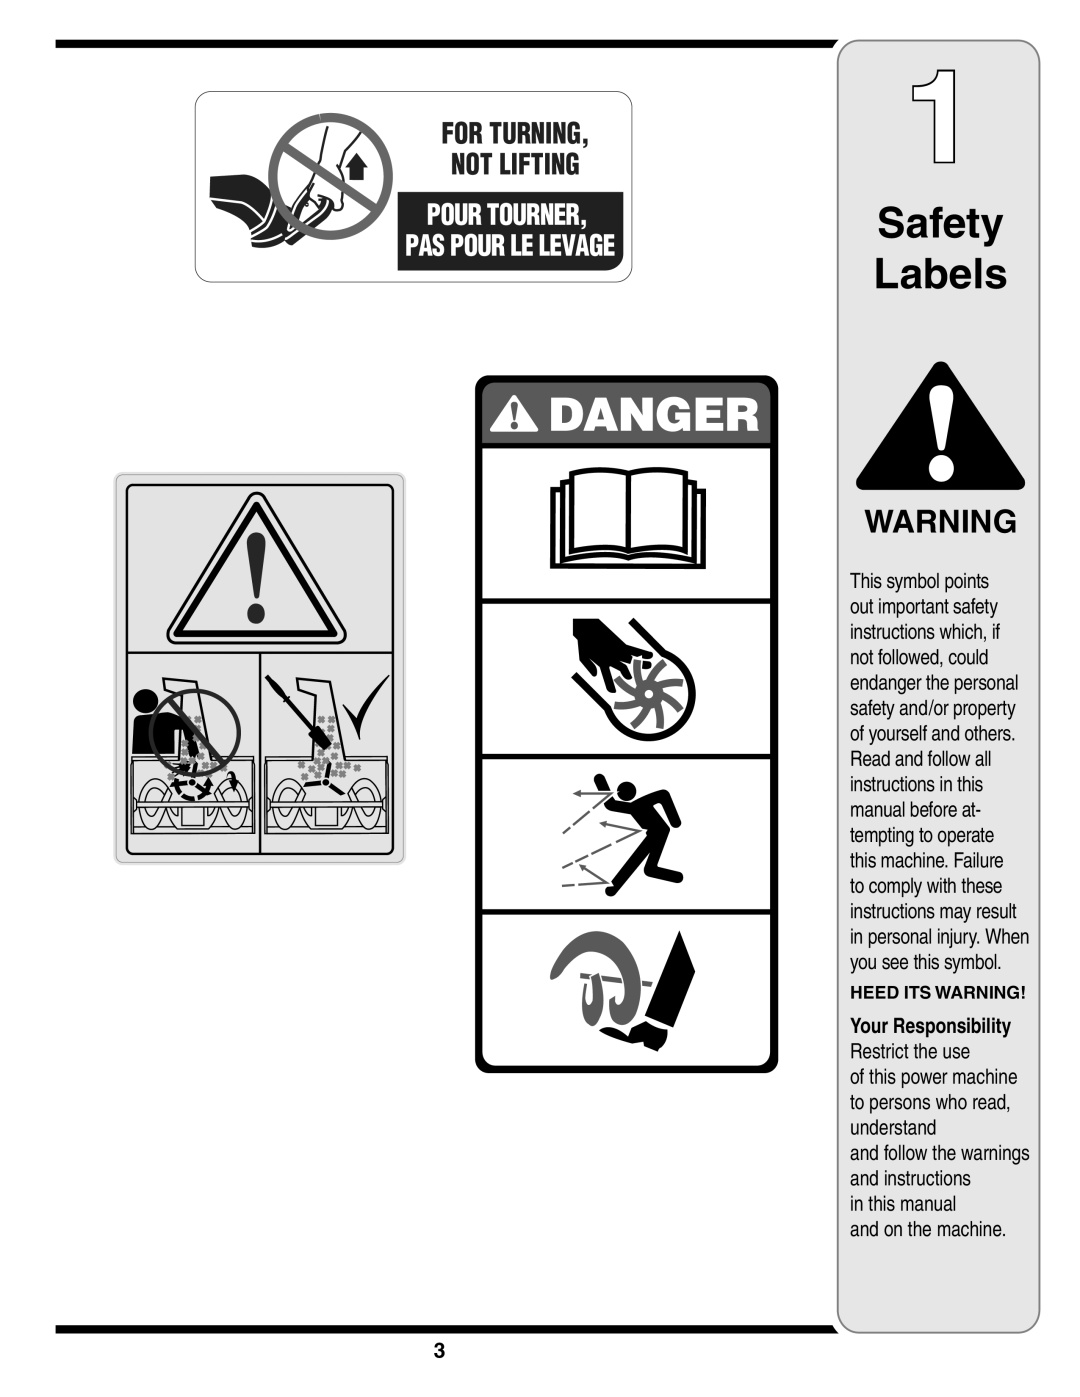 MTD S250, S261, S240, S230, S260 warranty Safety Labels, For Turning Not Lifting, Pour Tourner, Pas Pour Le Levage 